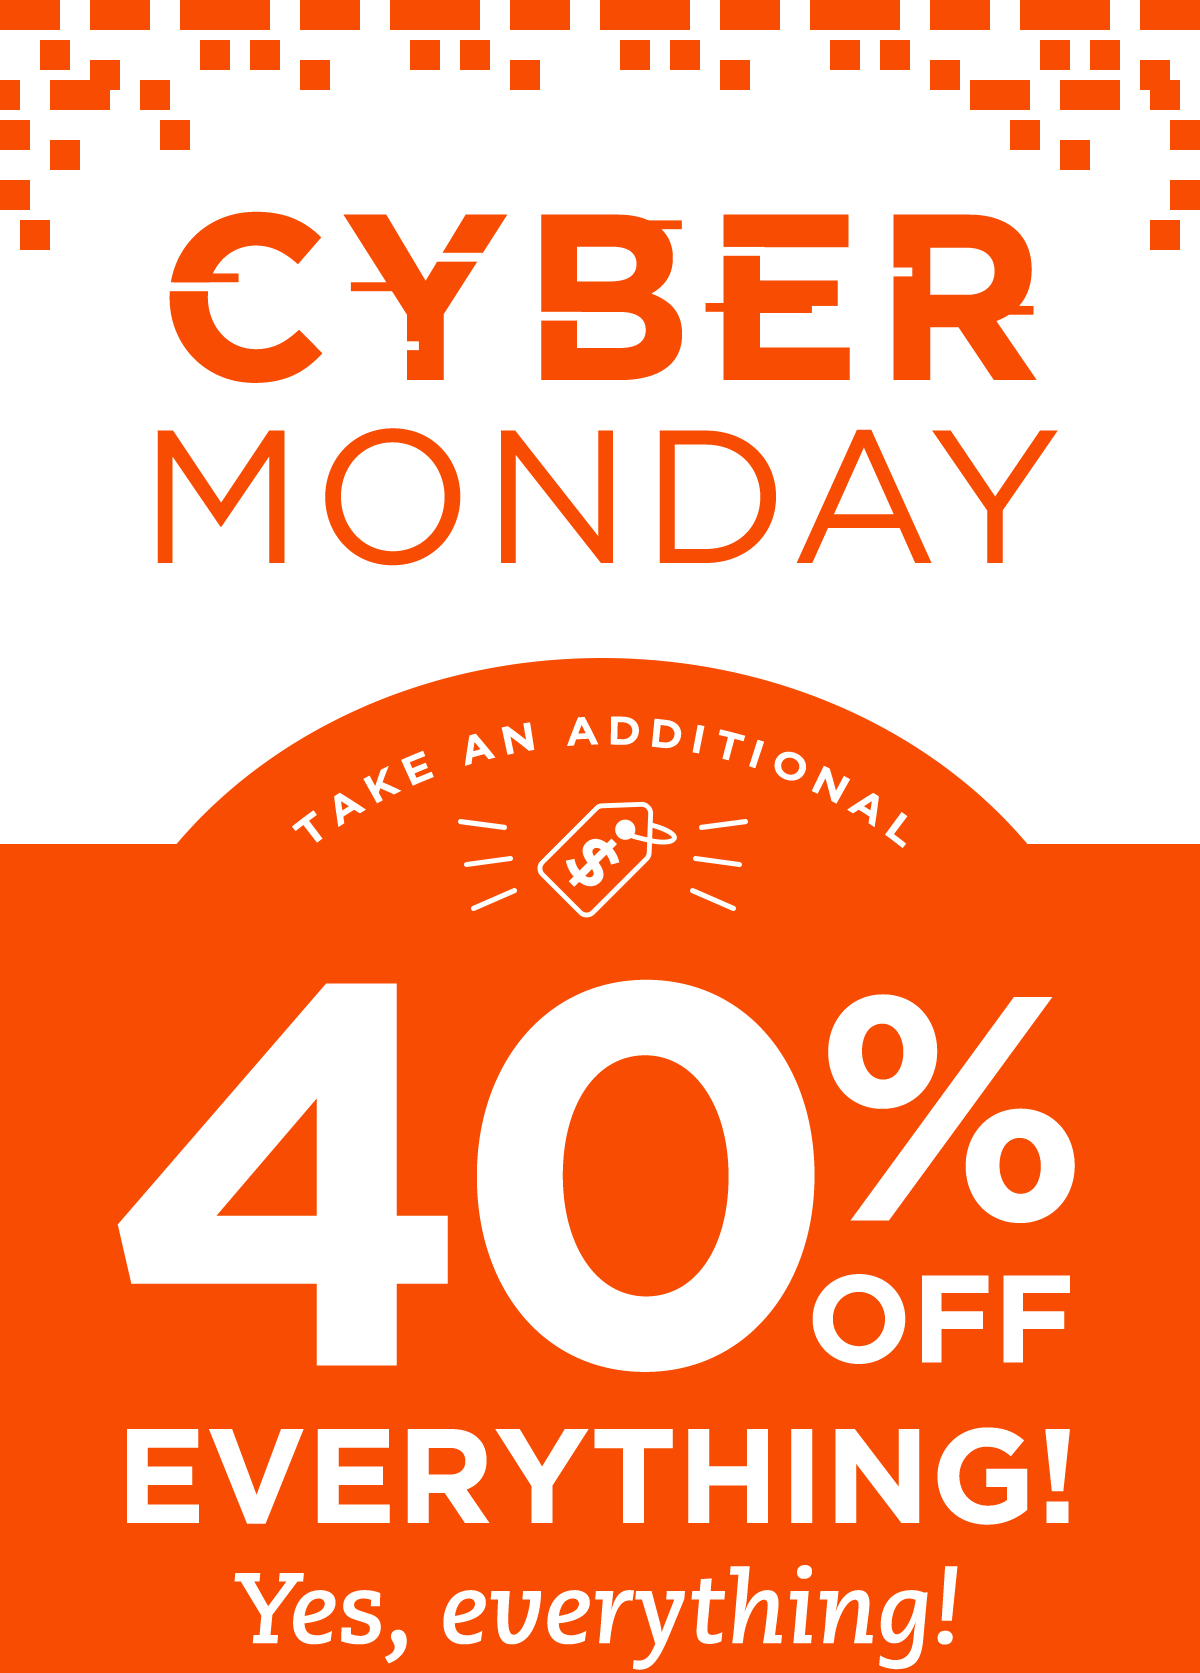 CYBER MONDAY. Take an additional 40% off everything, Yes, everything.